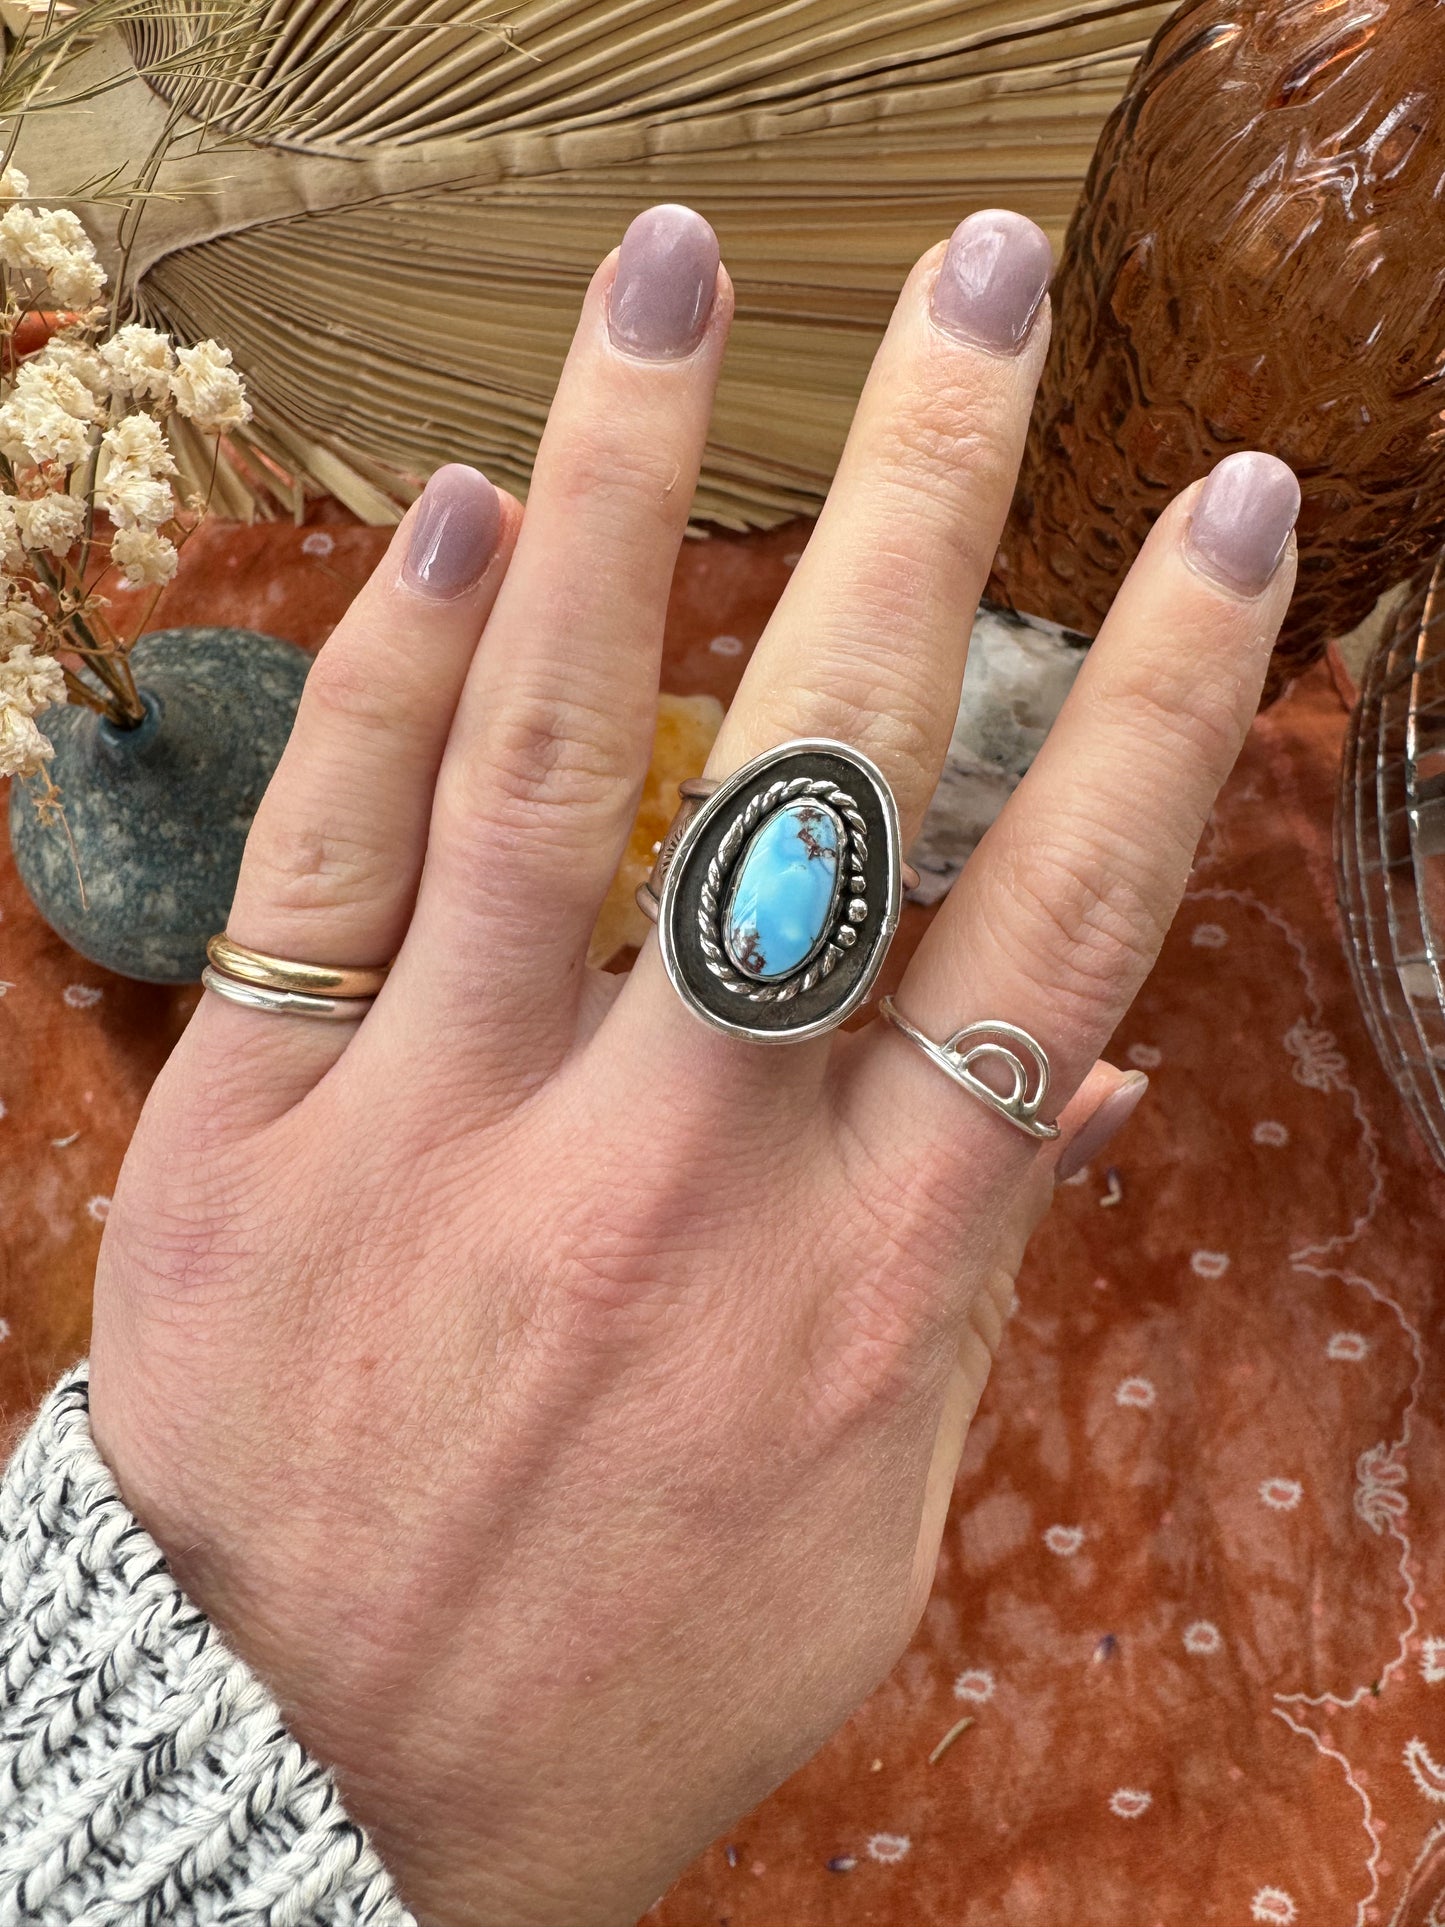 a female hand showing a turquoise ring on her middle finger